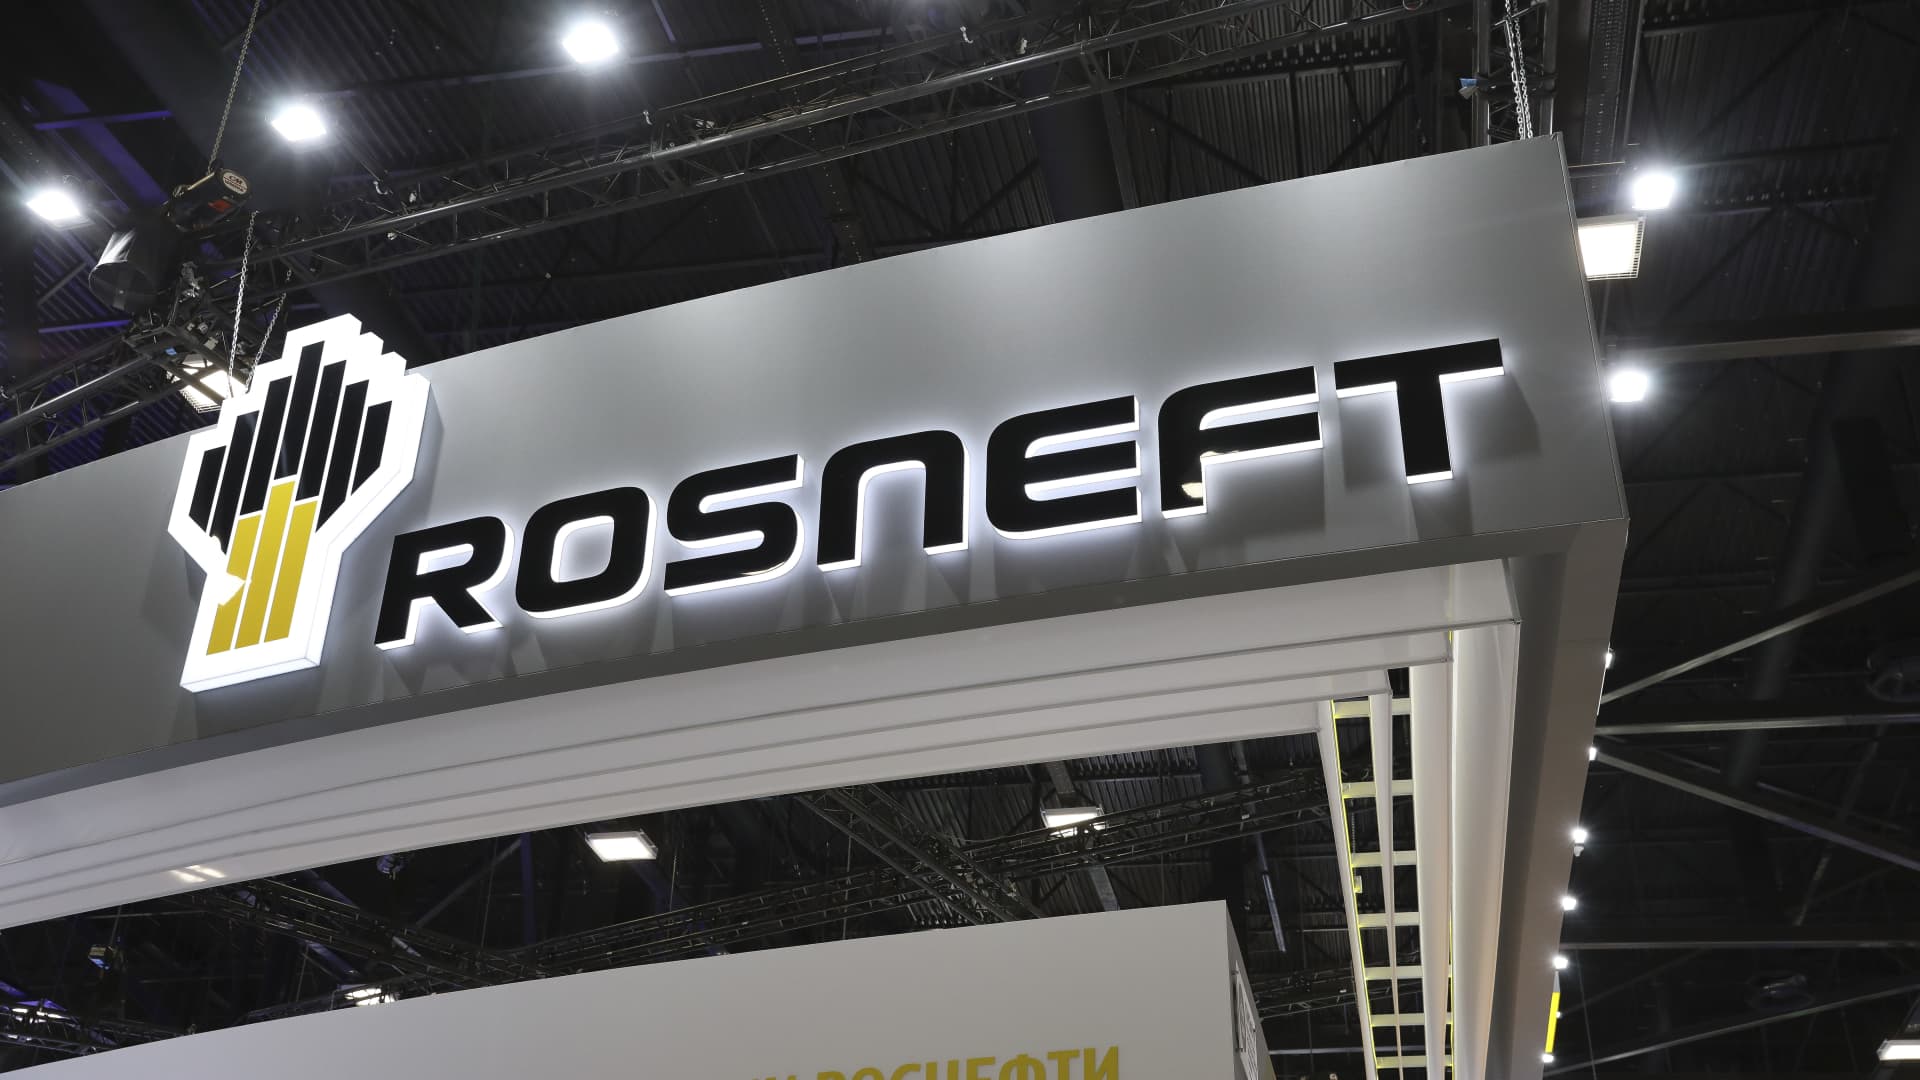 An illuminated logo sits on display above the Rosneft Oil Co. pavilion on June 5, 2019. Russia's Rosneft is holding back on signing new crude oil deals with two Indian state refiners, three sources with knowledge of the matter said, as it has committed sales to other customers.